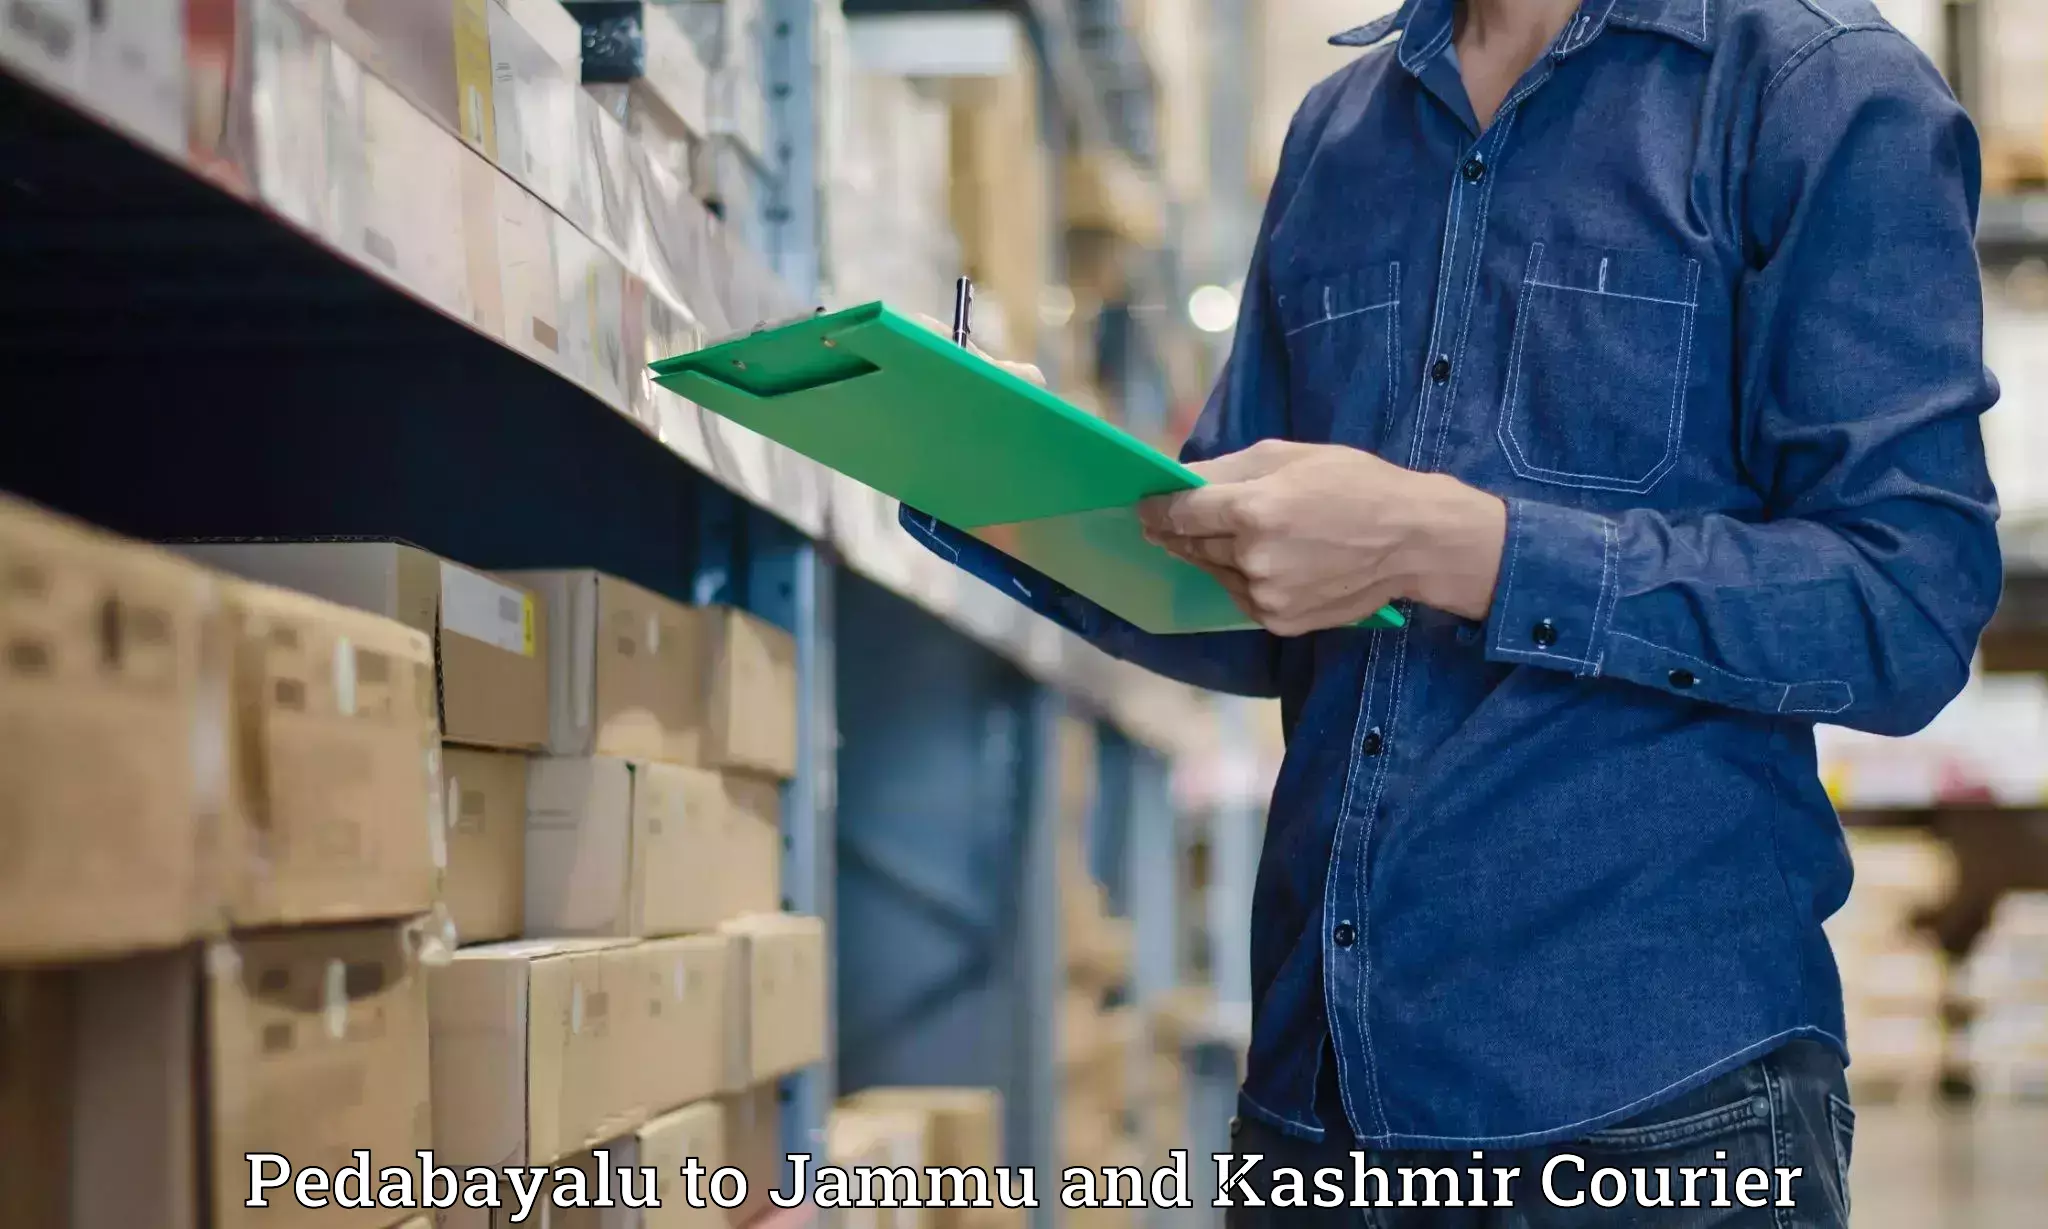 State-of-the-art courier technology Pedabayalu to Jammu and Kashmir